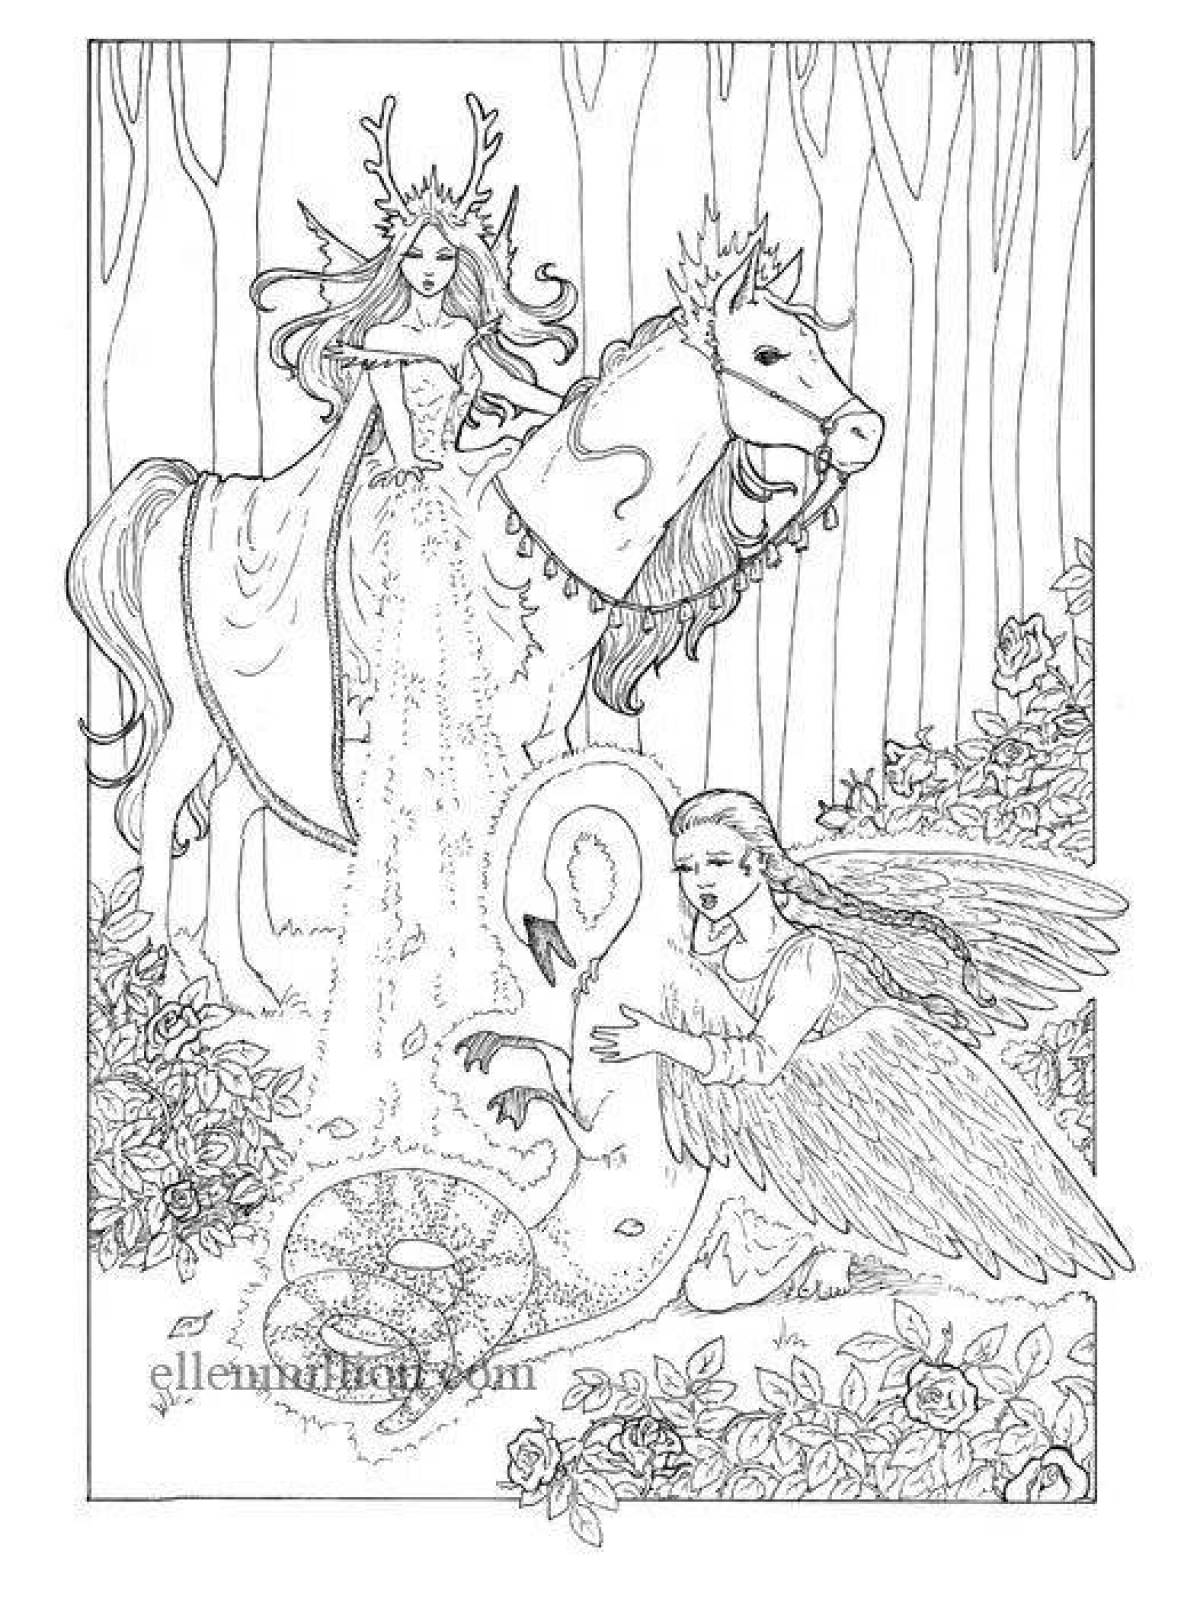 Delightful coloring book based on Bazhov's fairy tales